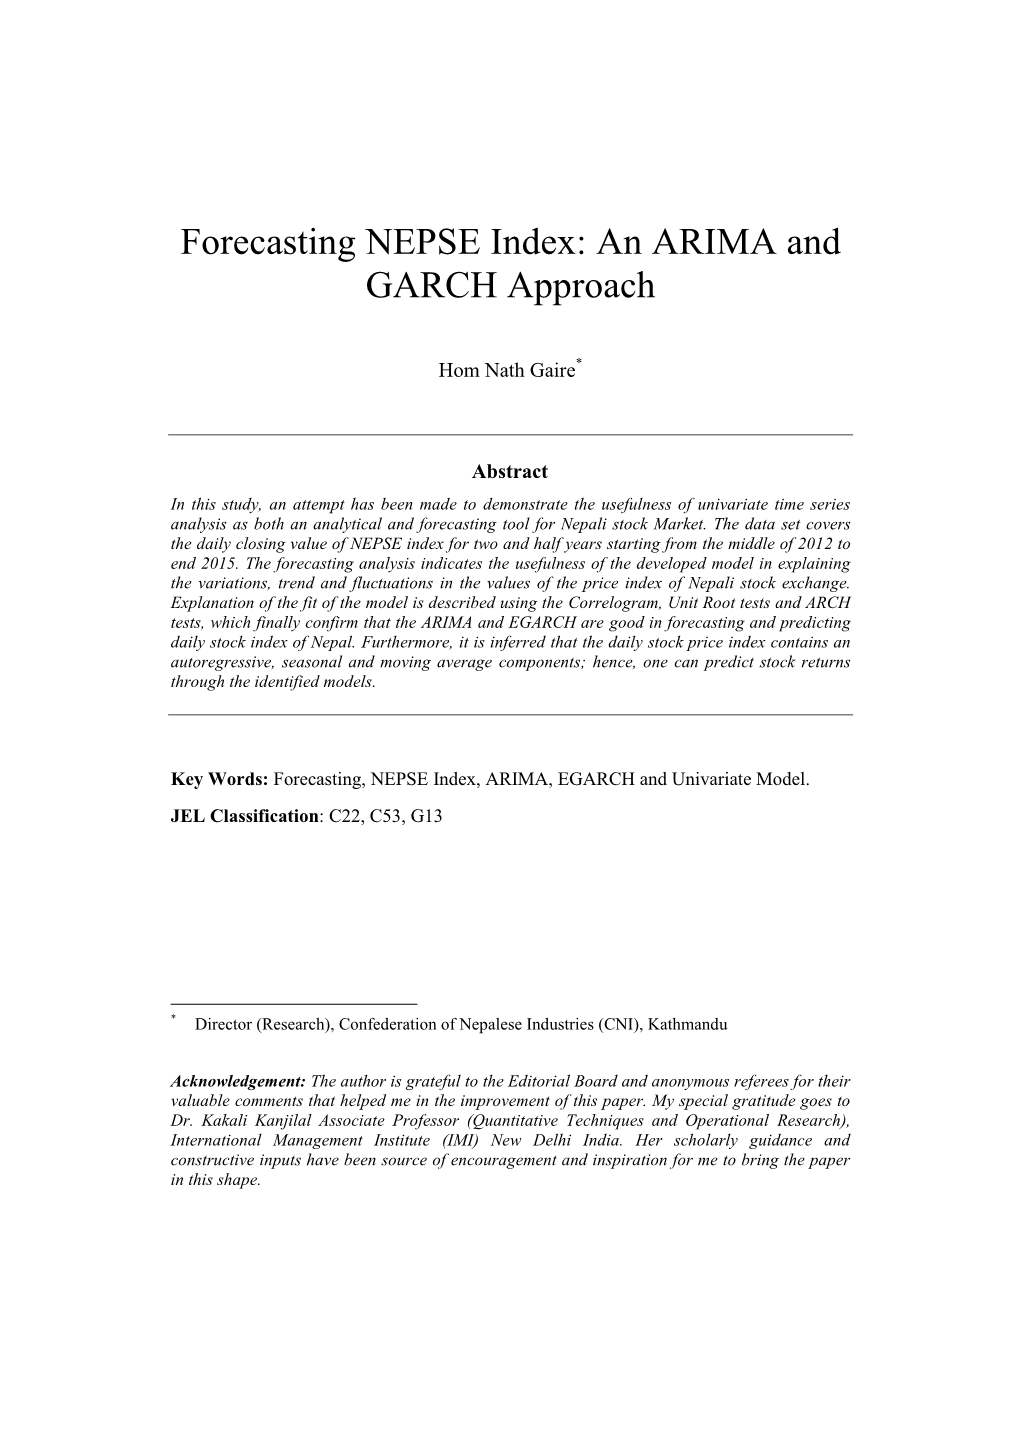 Forecasting NEPSE Index: an ARIMA and GARCH Approach